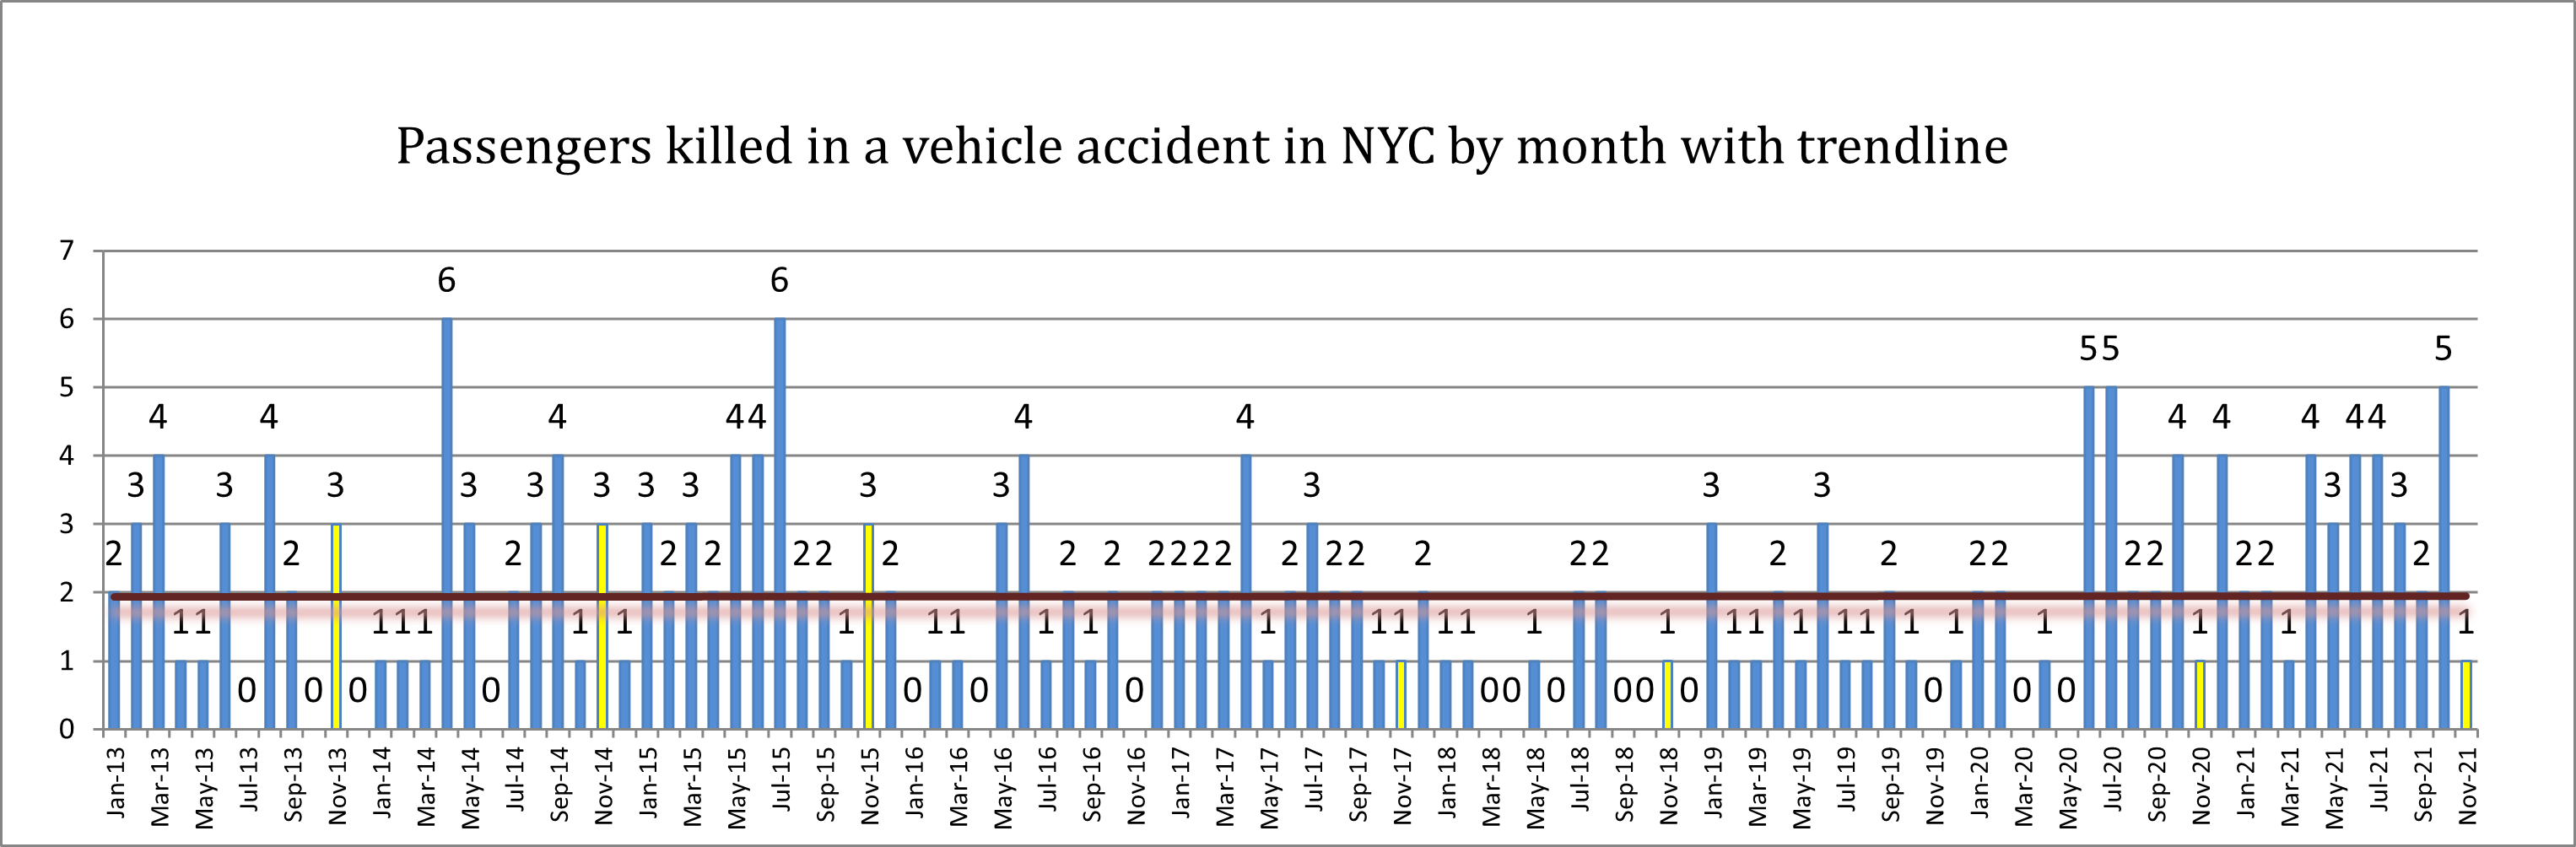 passengers killed in New york car accidents 2021 November